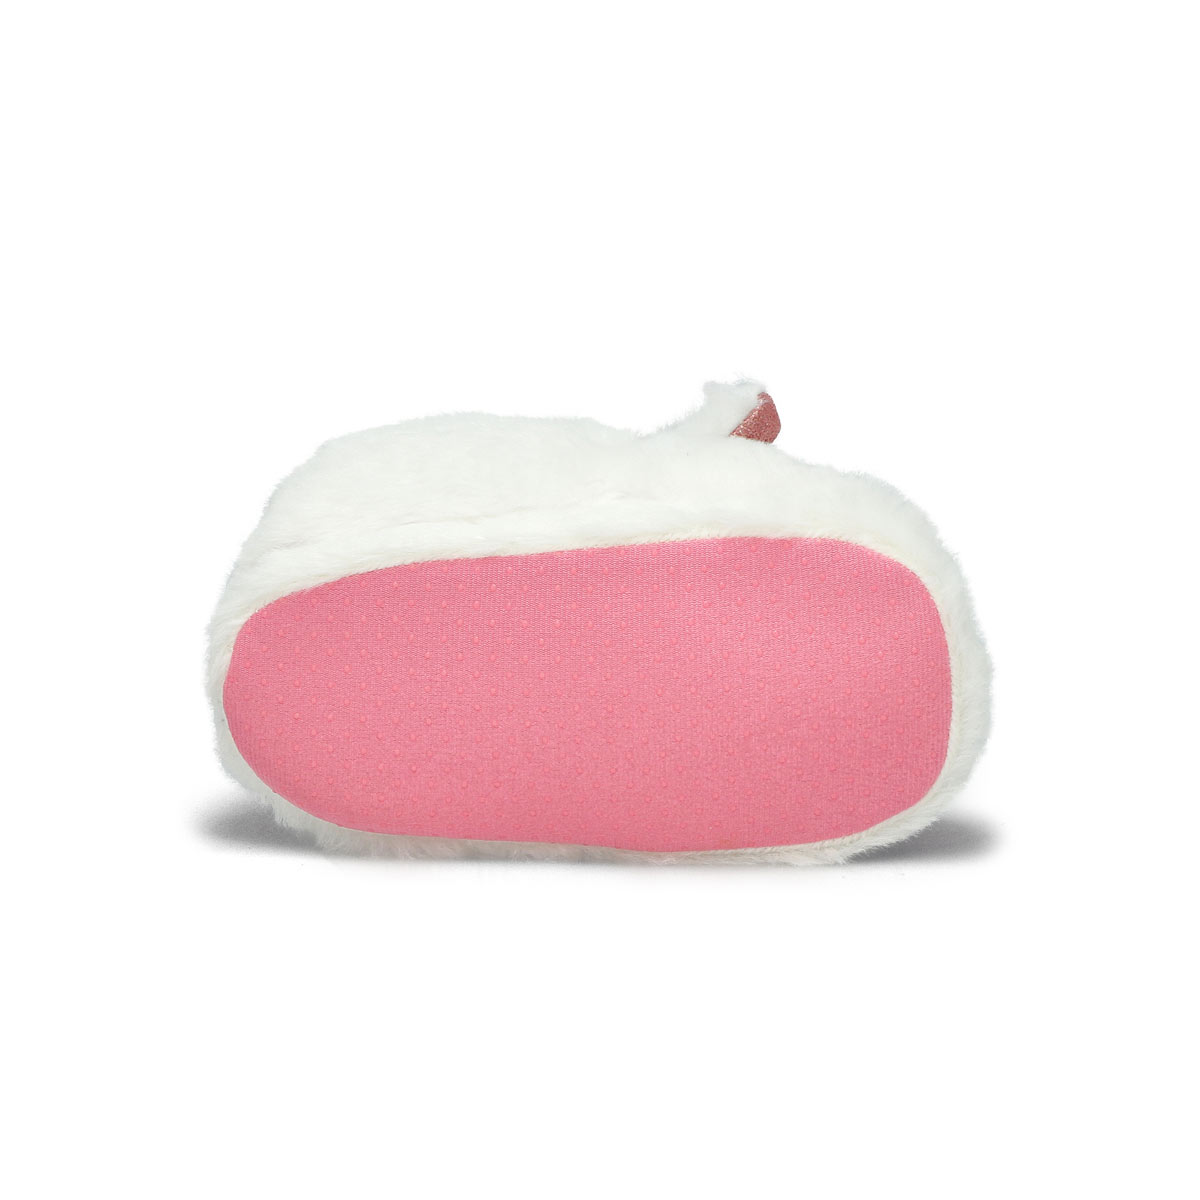 Infant's Kitty Slipper Bootie - White Pink